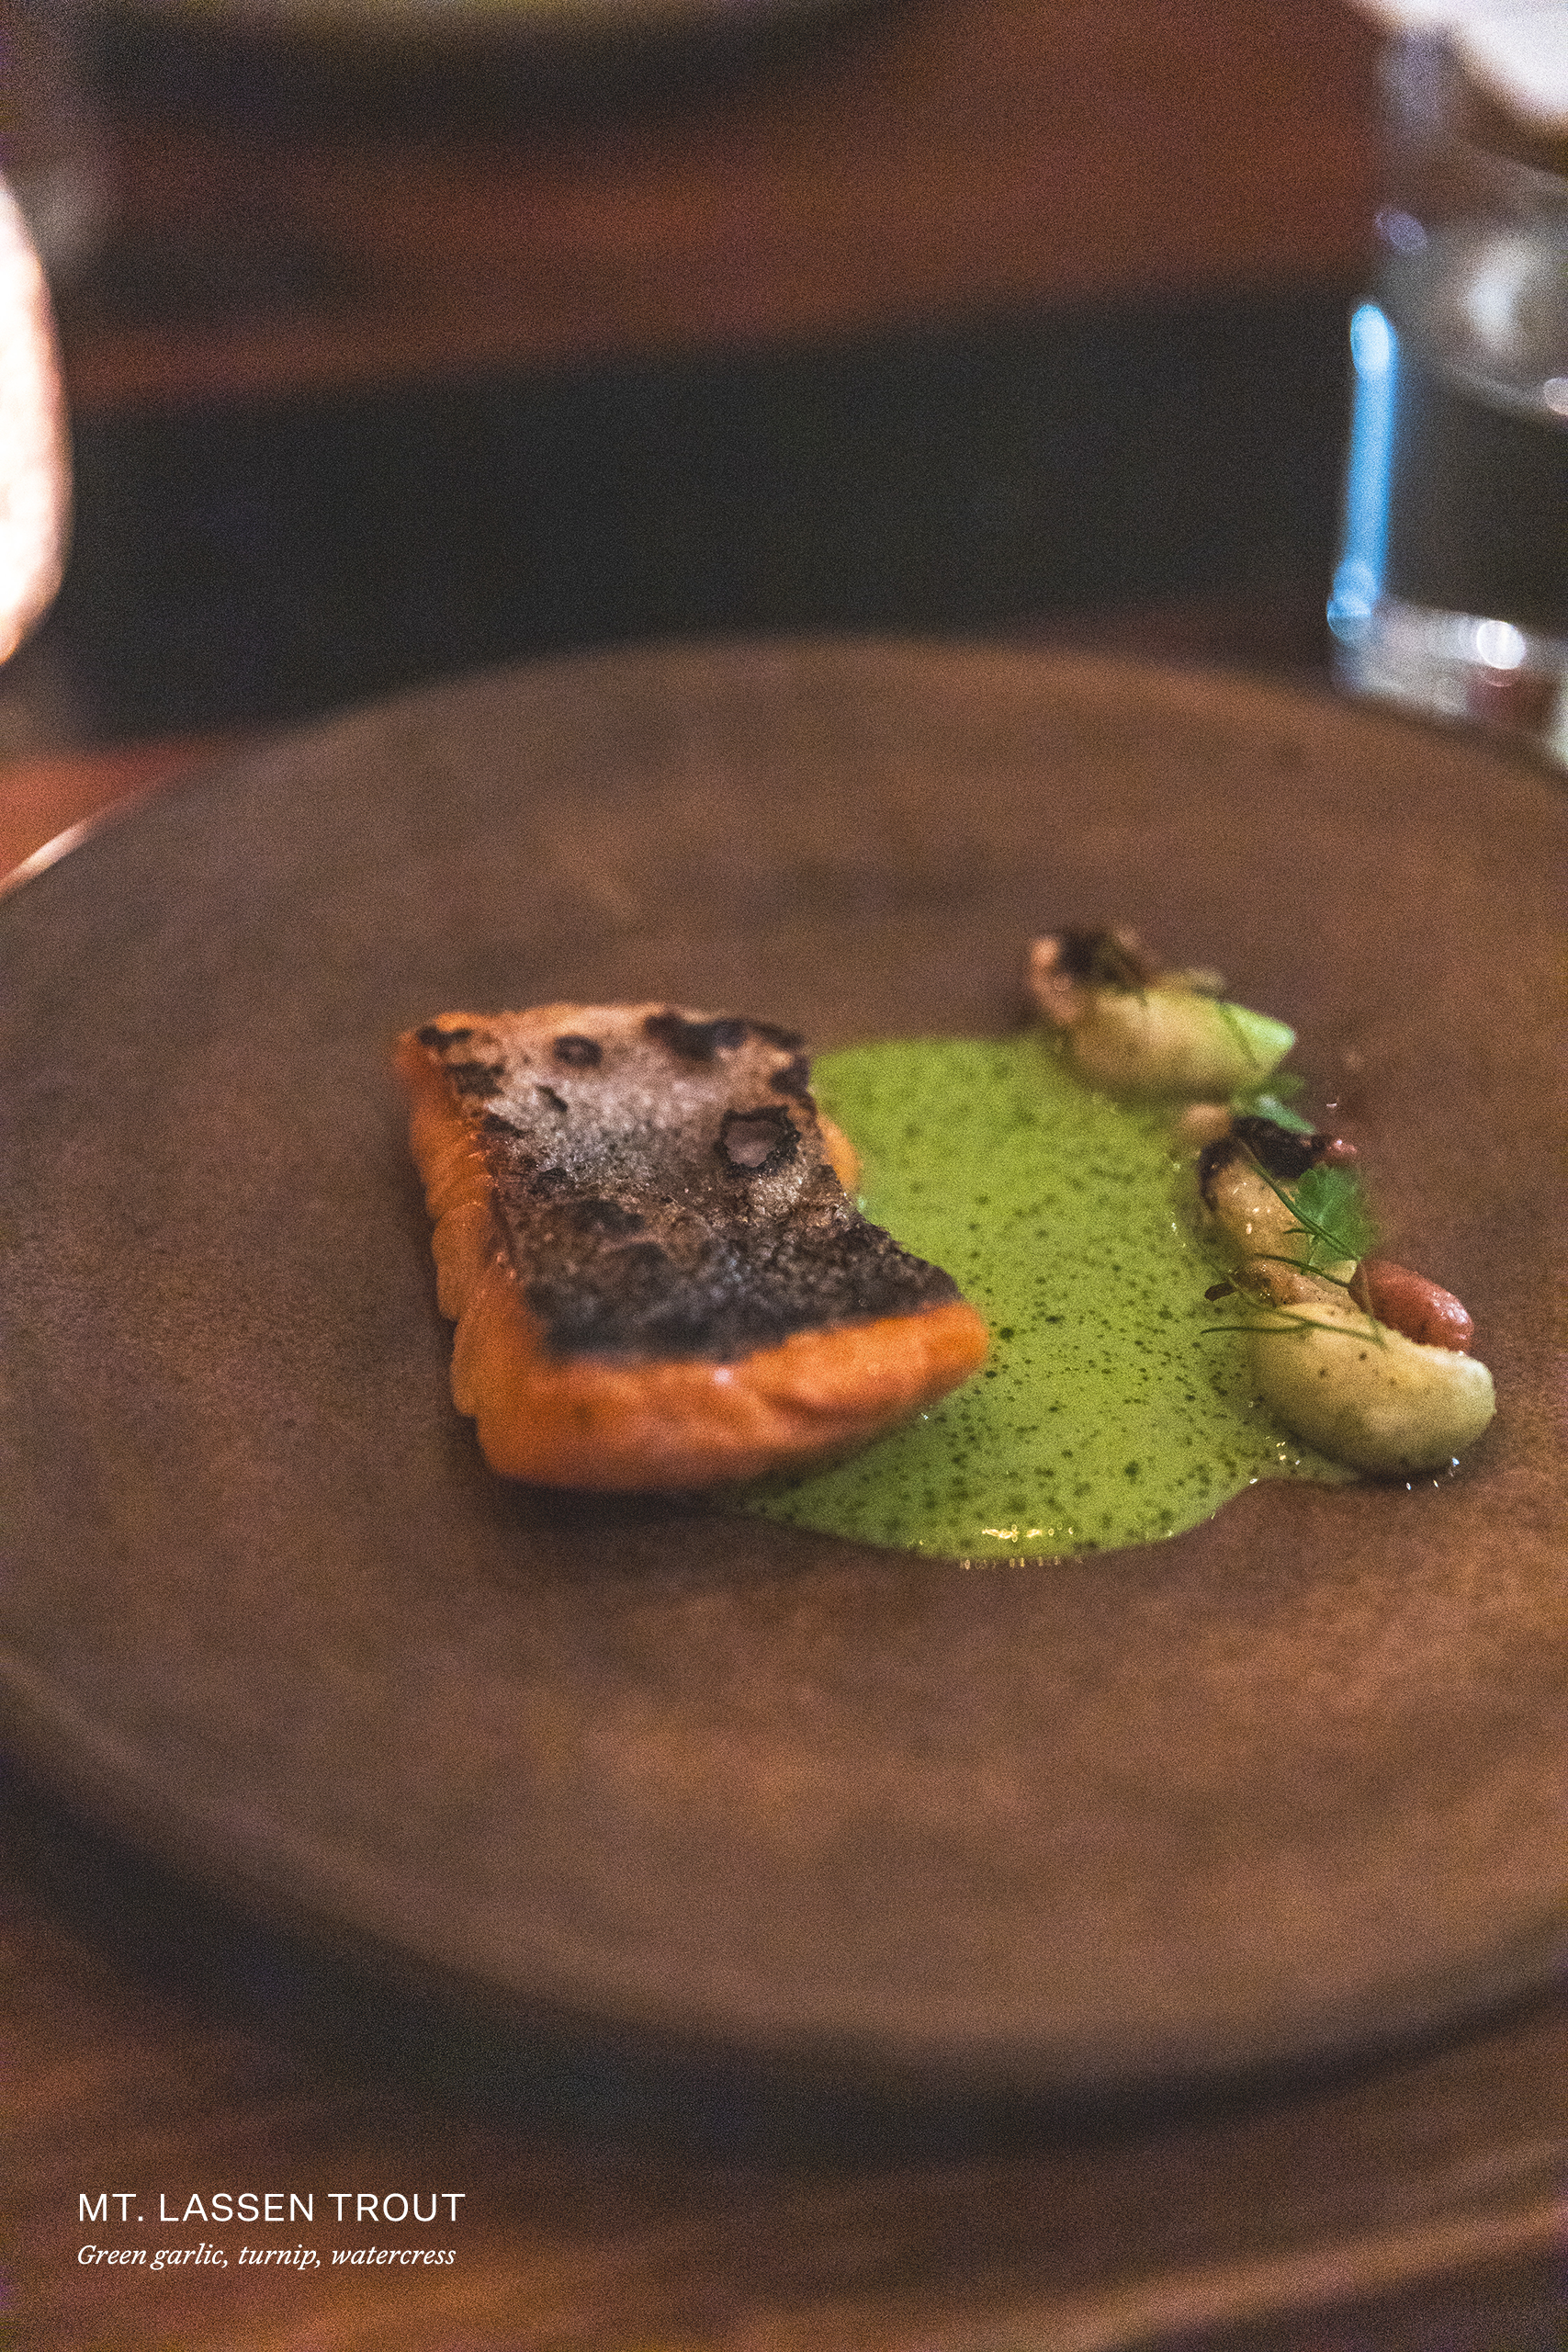 Mt. Lassen Trout with green garlic, turnip, and watercress